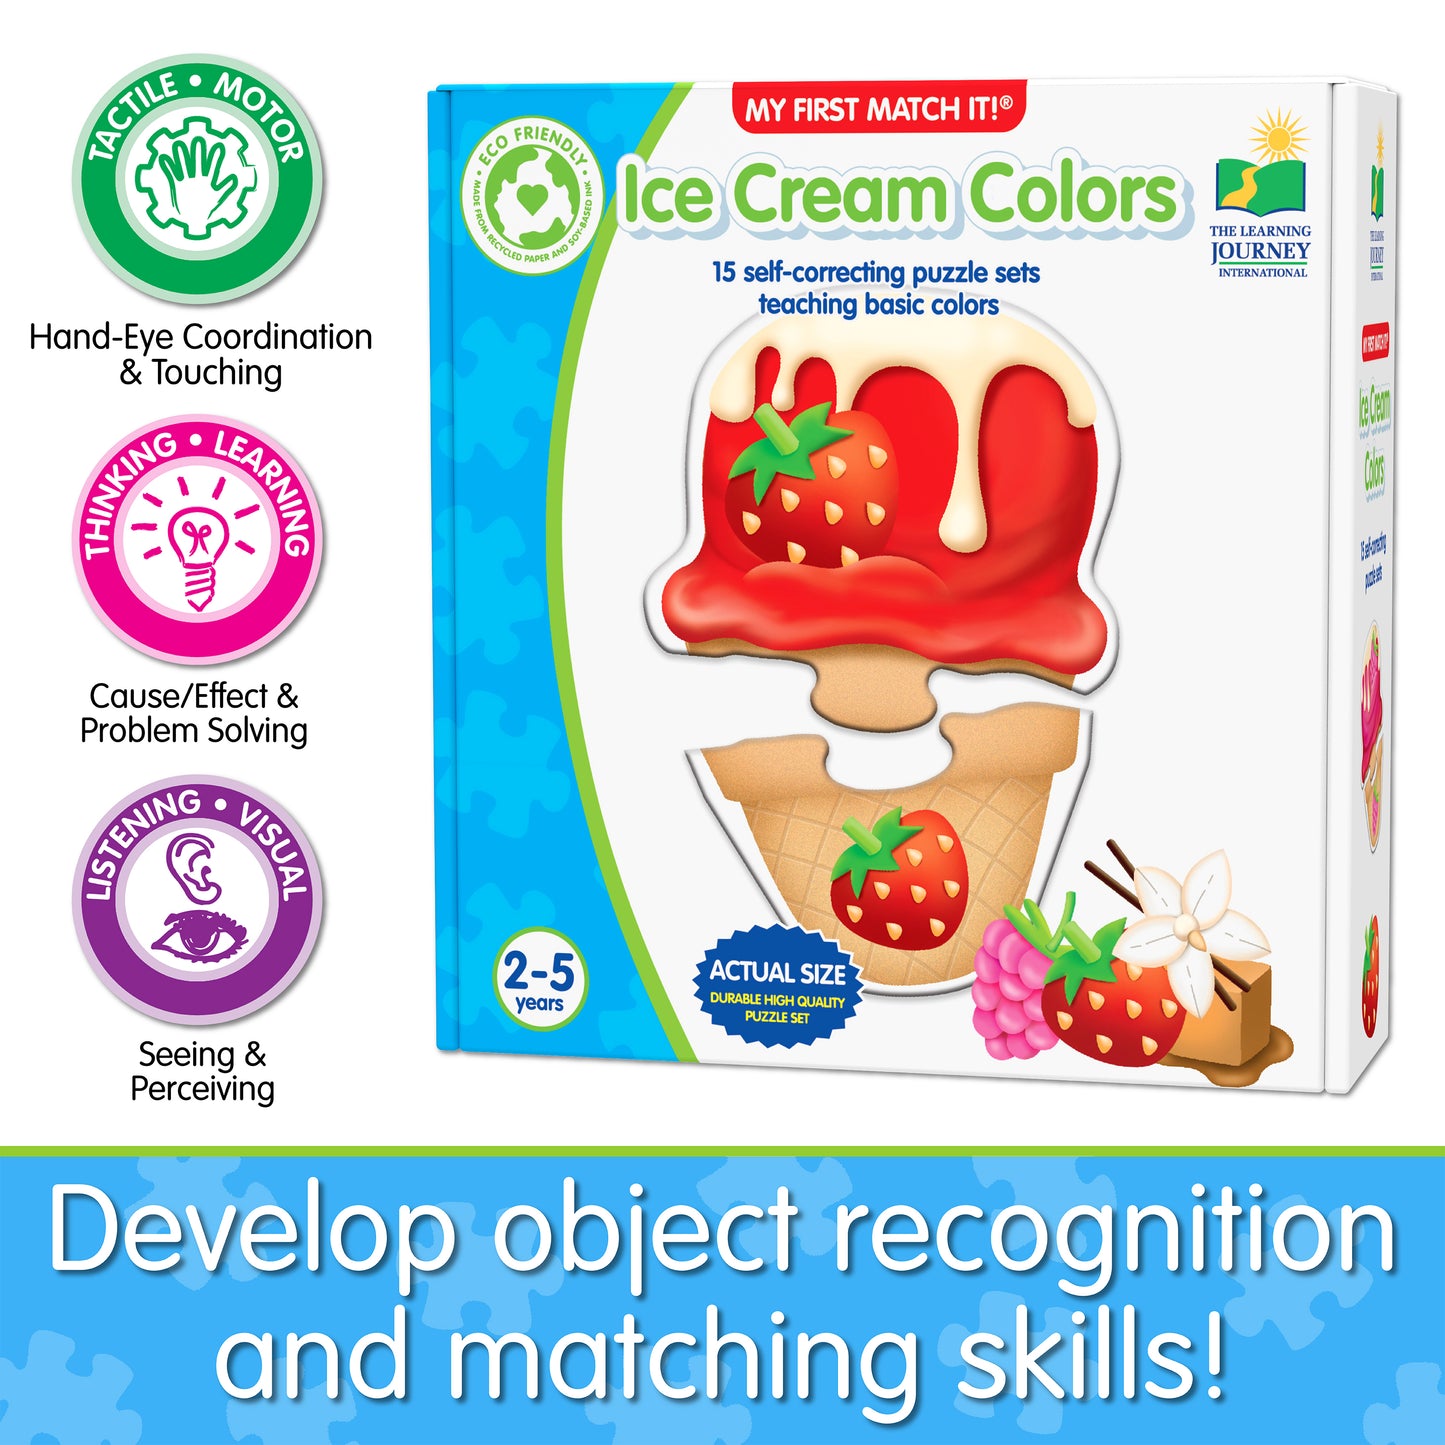 Infographic about My First Match It - Ice Cream Colors' educational benefits that says, "Develop object-recognition and matching skills!"